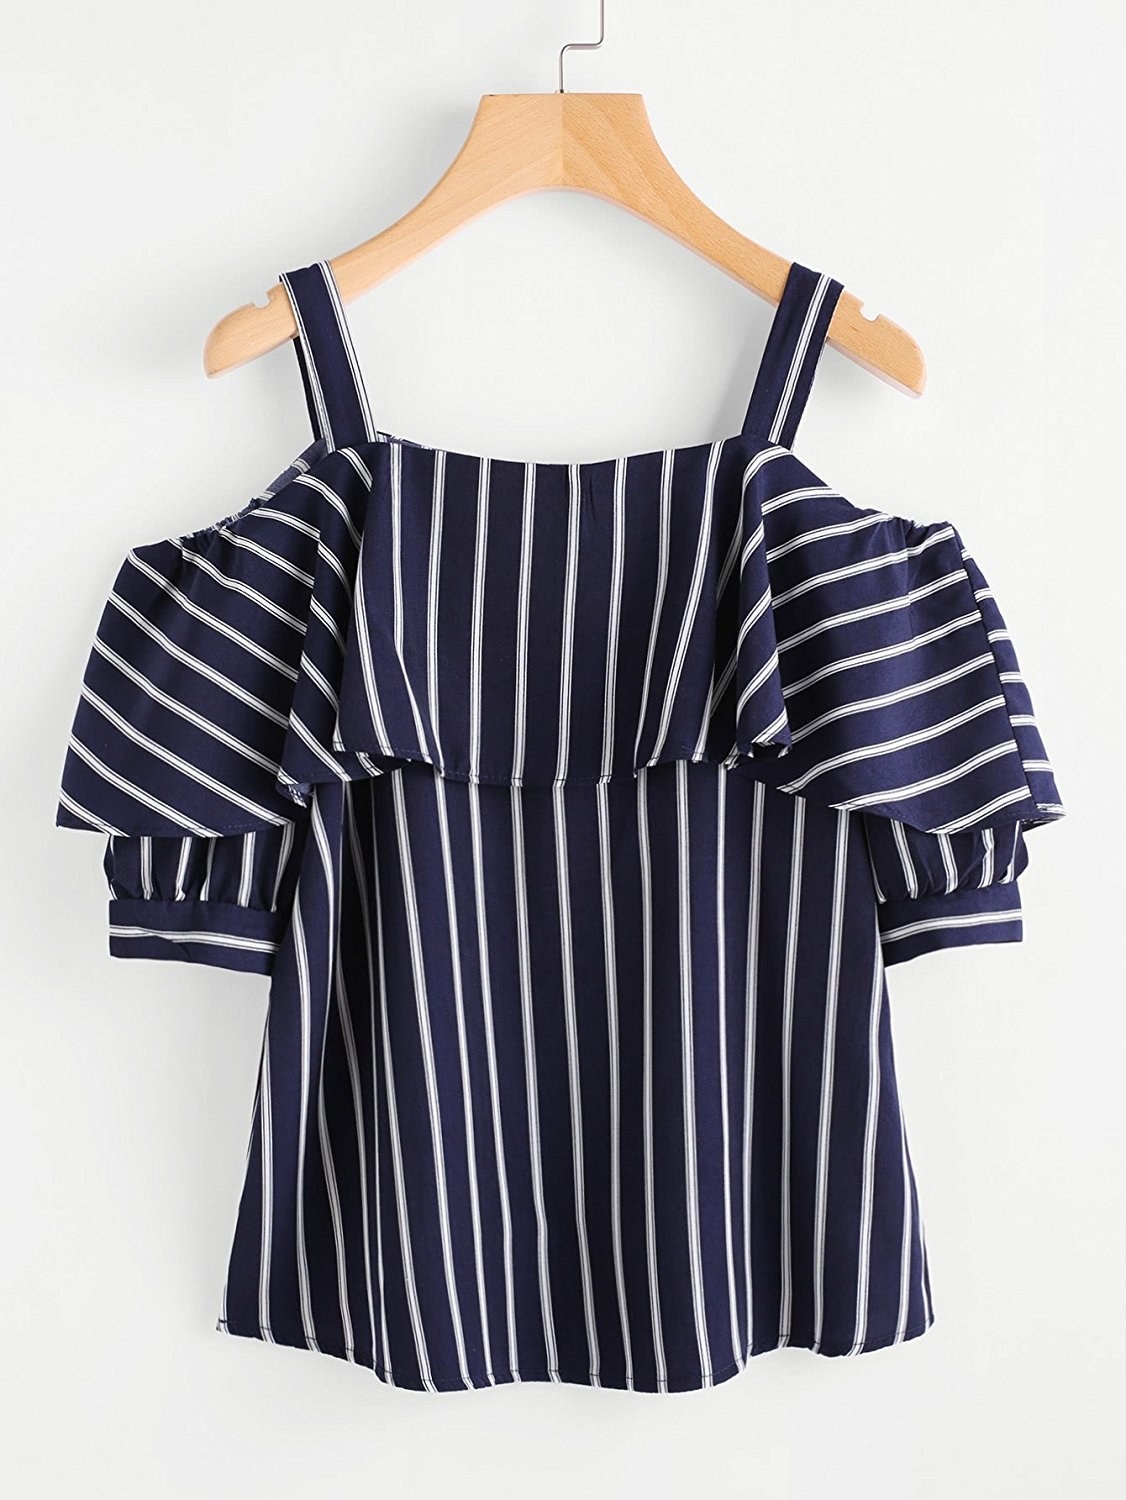 34 Gorgeous Tops You’ll Want To Add To Your Closet ASAP